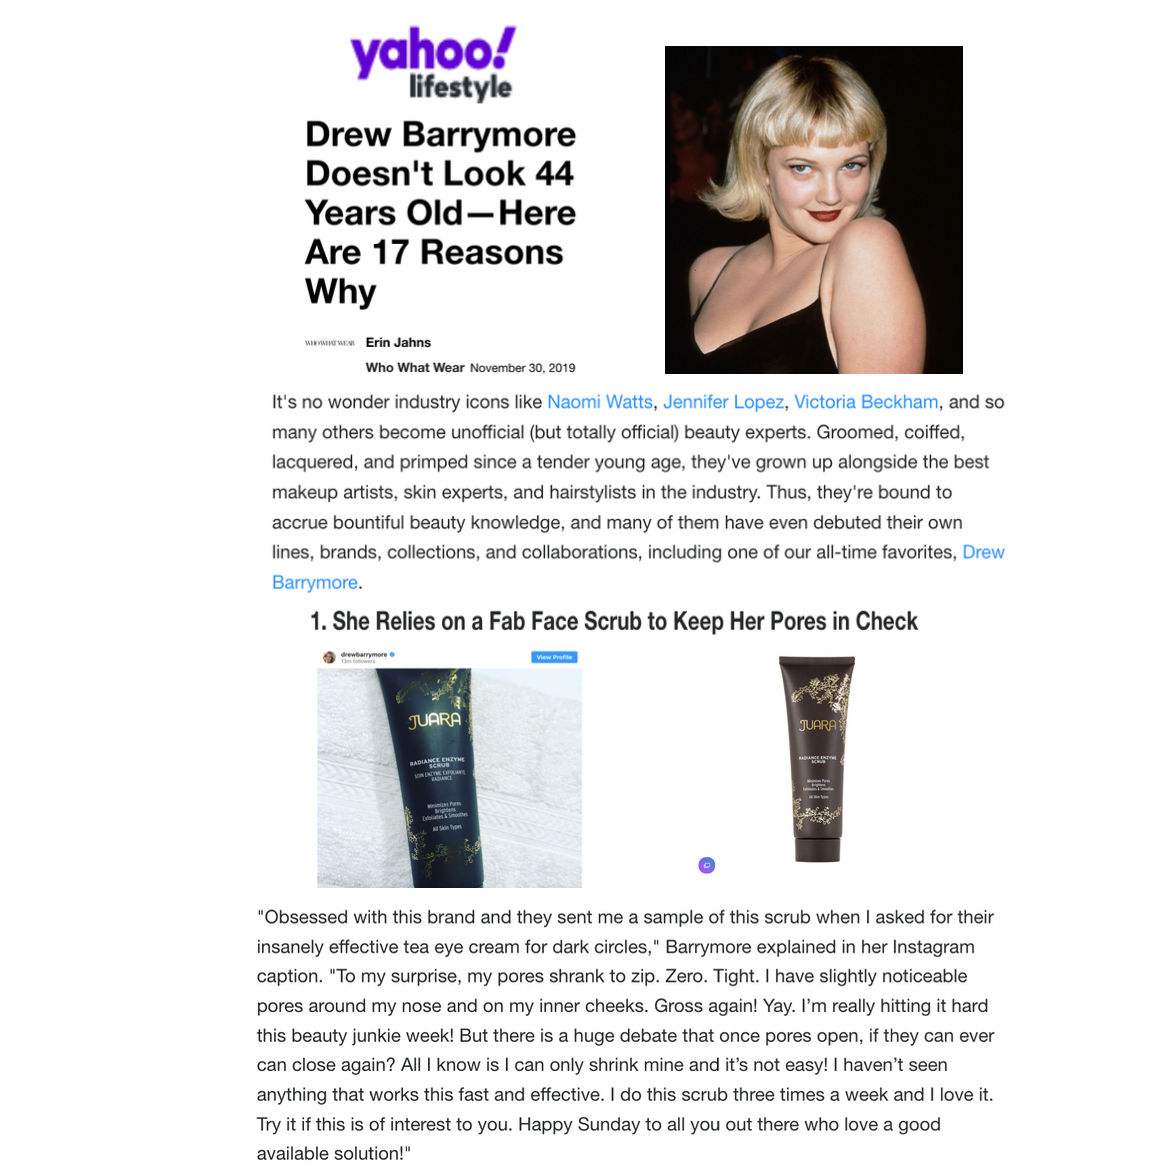 YAHOO LIFESTYLE: Drew Barrymore Doesn't Look 44 Years Old-Here are 17 Reasons Why JUARA Skincare